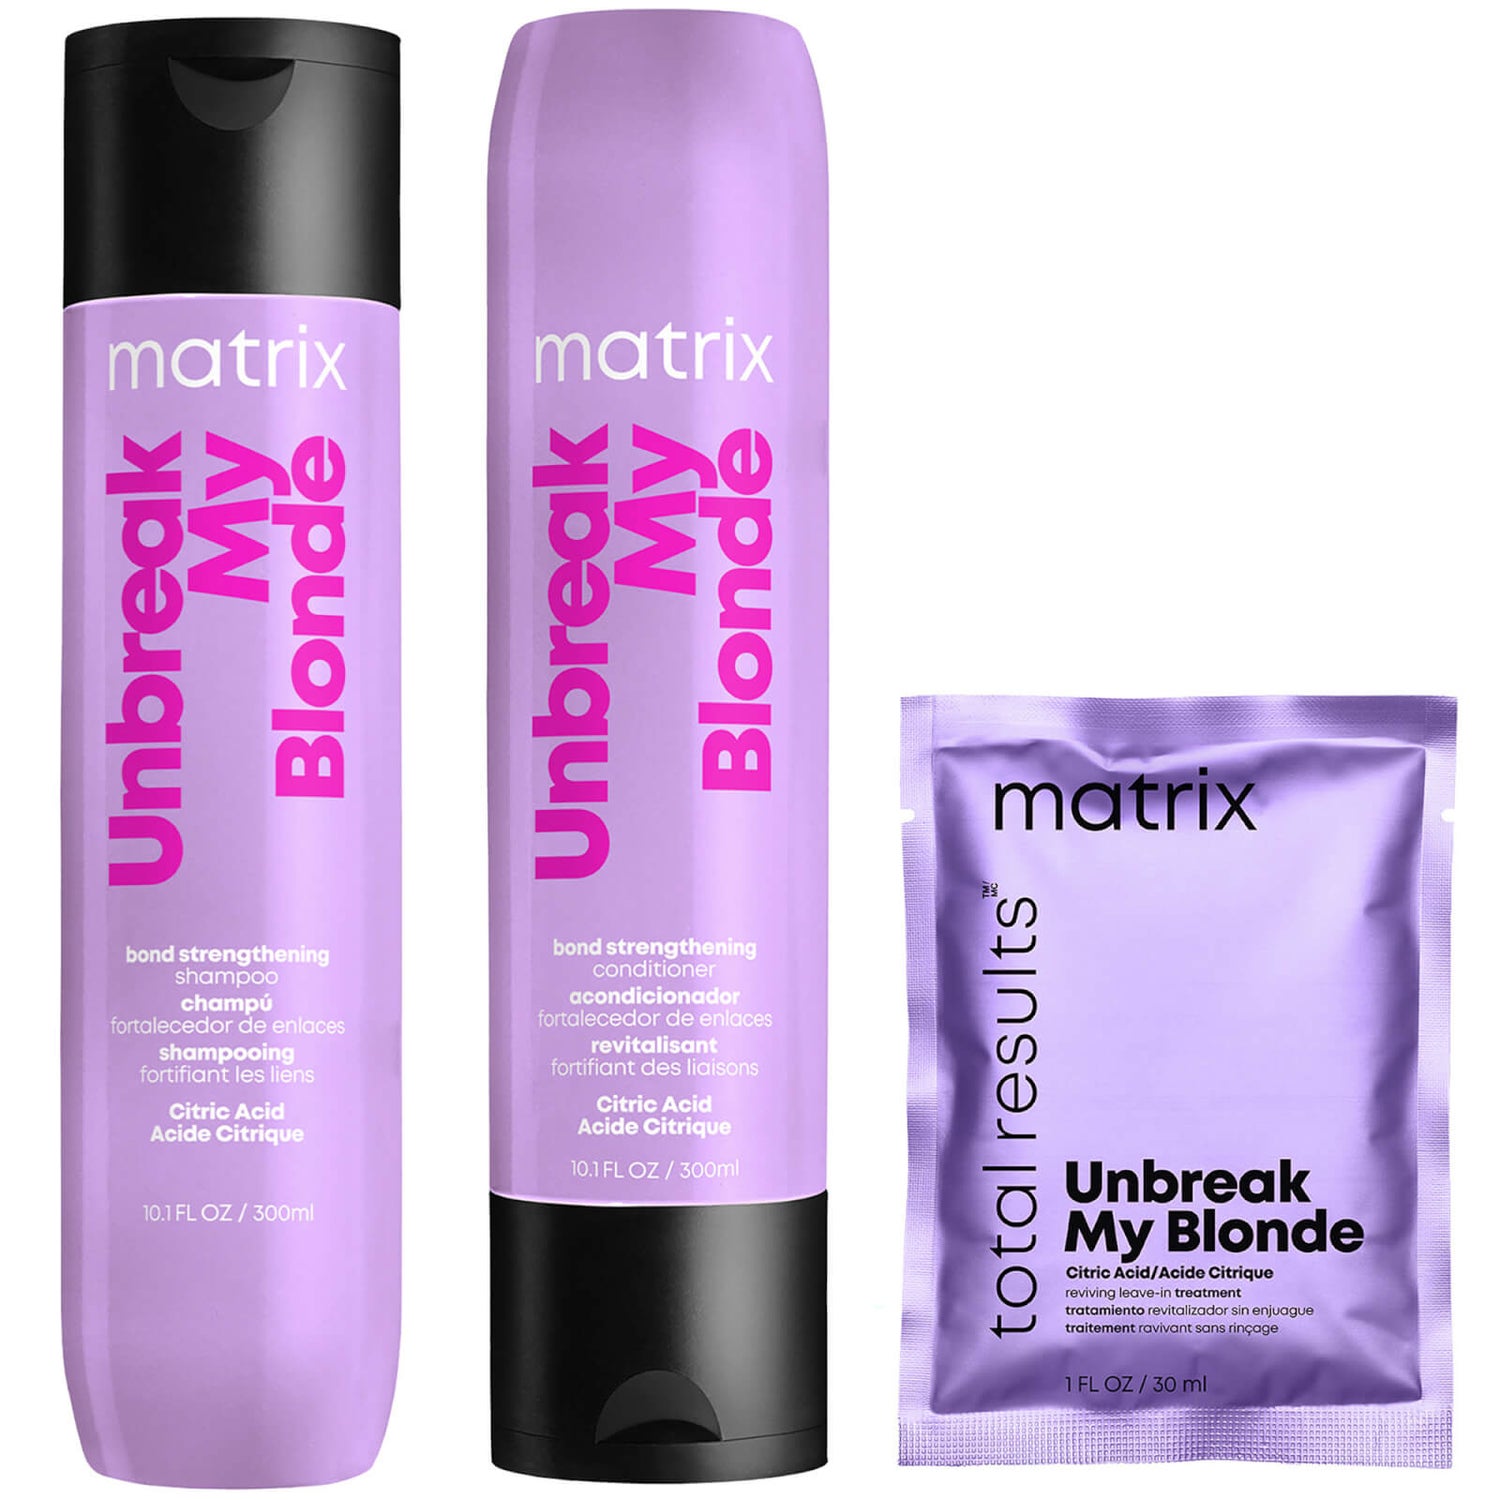 Matrix Unbreak My Blonde Shampoo 300ml, Conditioner 300ml + Mini Leave-in 30ml For Chemically Over-processed Hair (Worth £34.09)